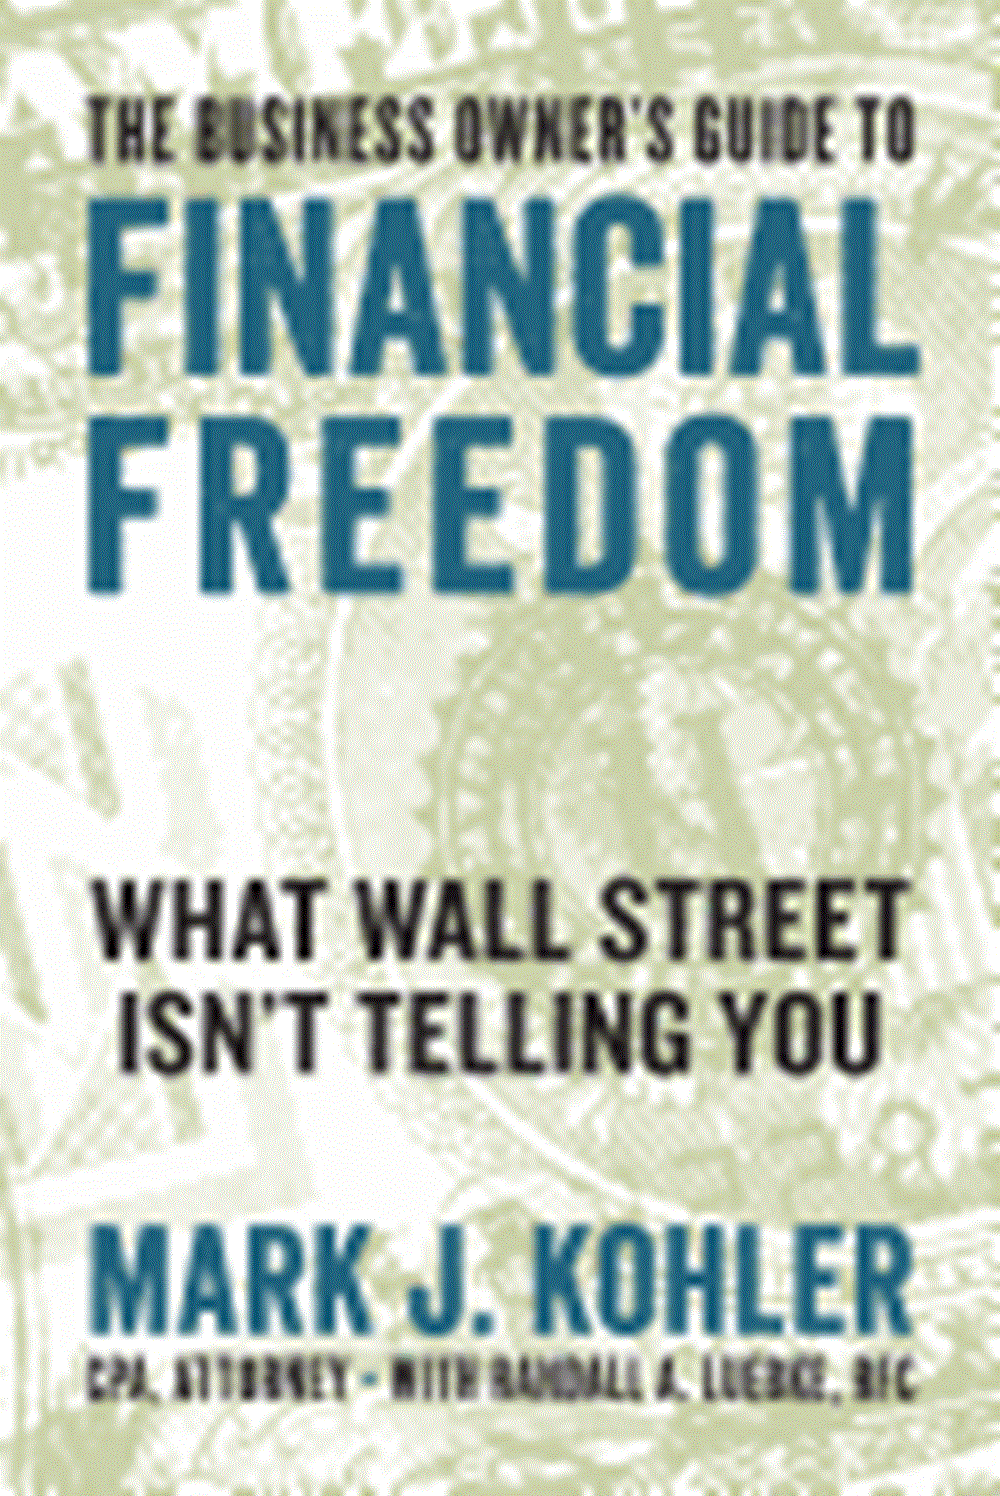 Business Owner's Guide to Financial Freedom What Wall Street Isn't Telling You